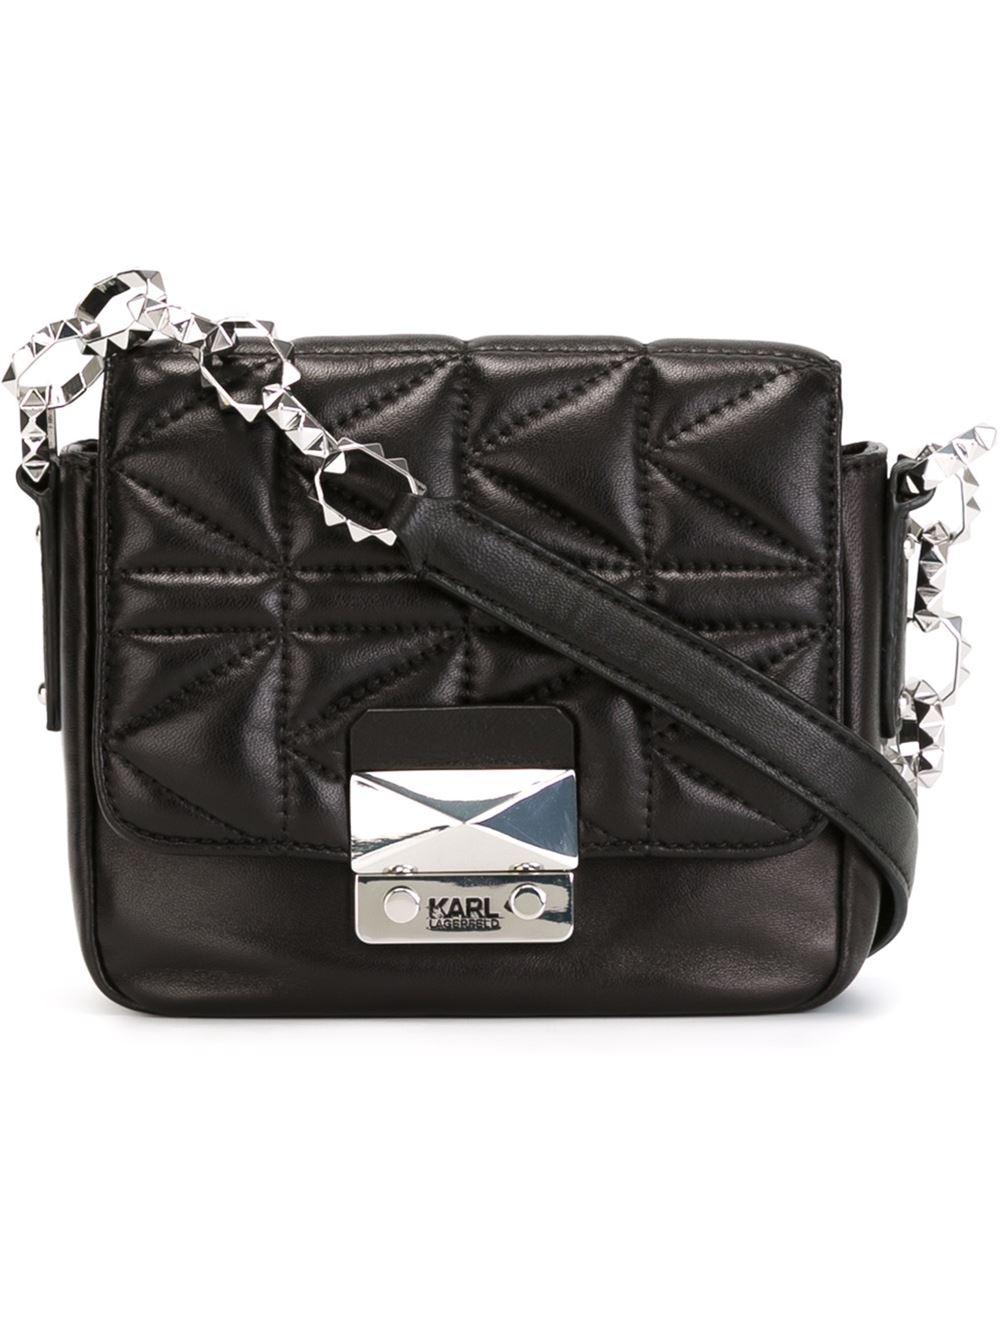 Karl Lagerfeld Small Quilted Crossbody Bag in Black - Lyst